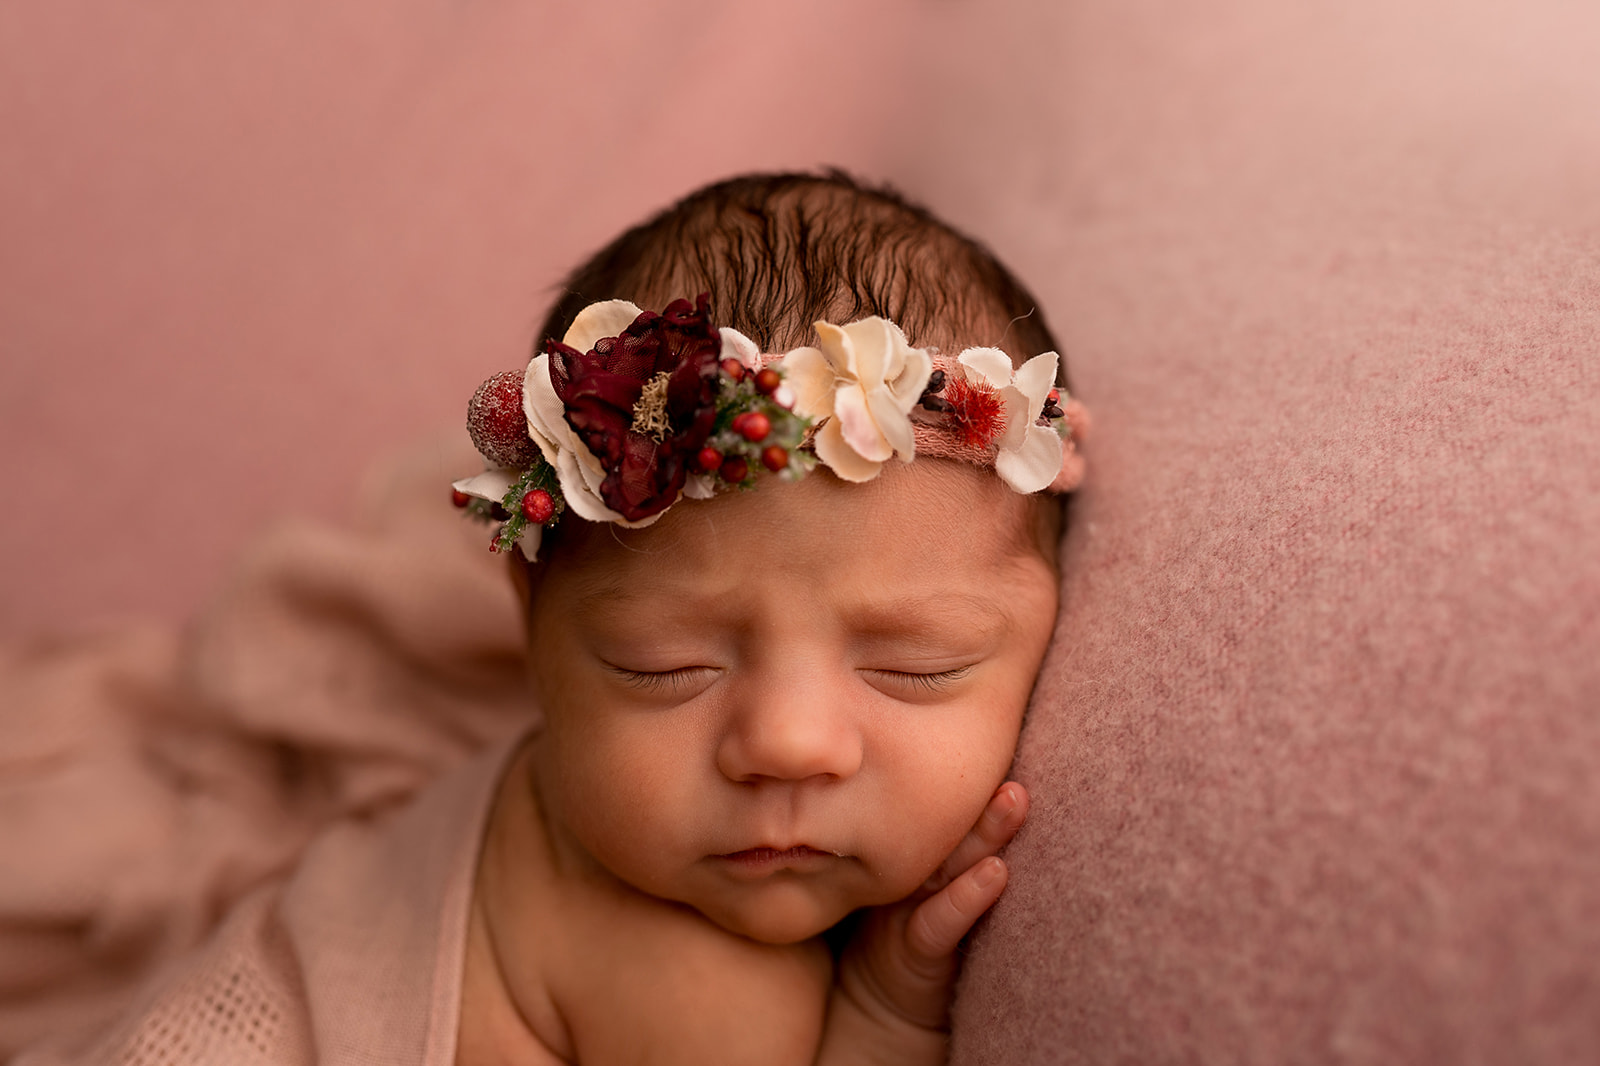 Studio newborn posed picture of baby girl with pink backdrop and floral background